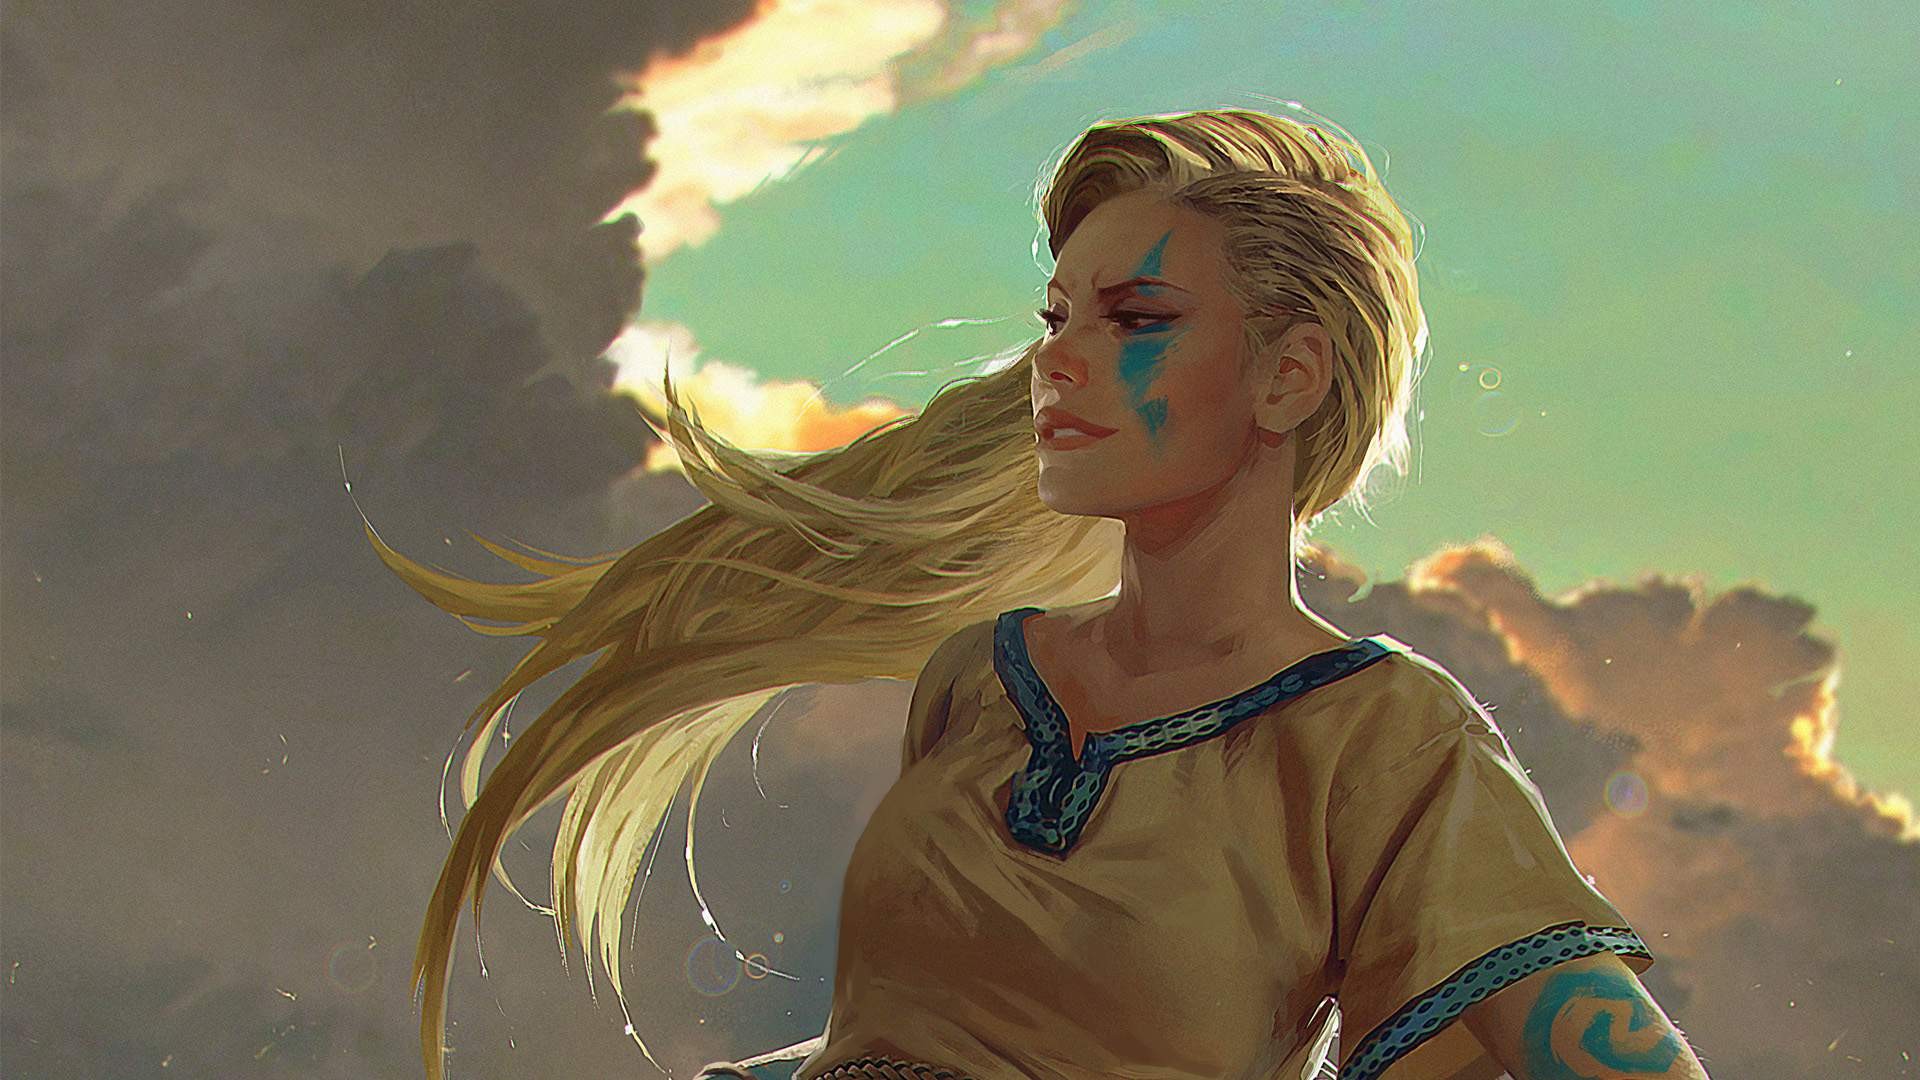 video game, gwent: the witcher card game, blonde, fantasy, illustration, the witcher HD wallpaper